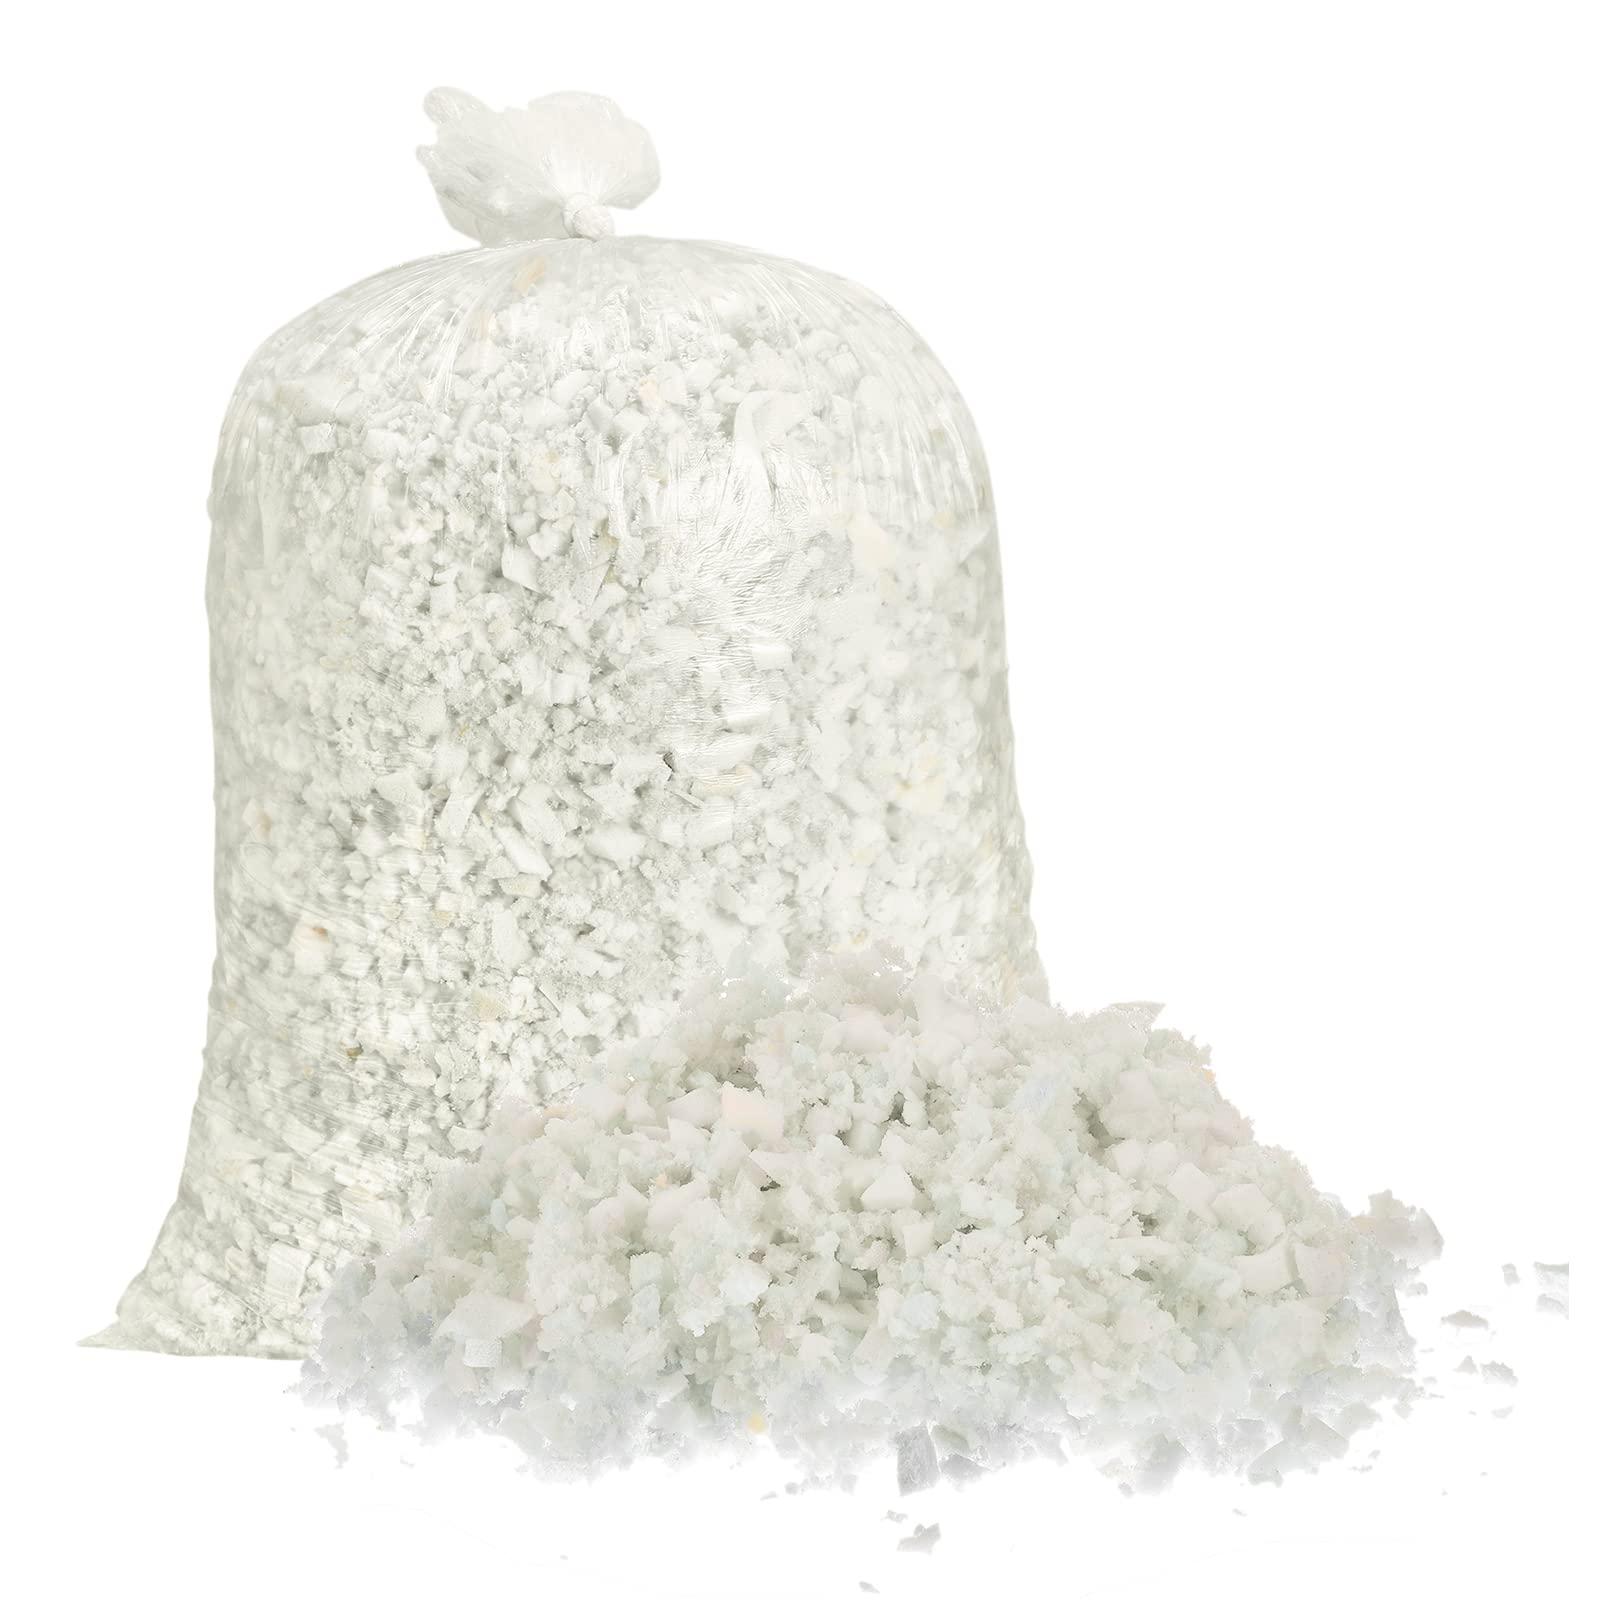 sourcing map Shredded Memory Foam Filling, 10 Pounds Bean Bag Filler Foam for Bean Bag Chairs, Cushions, Sofas, Pillows and More - White